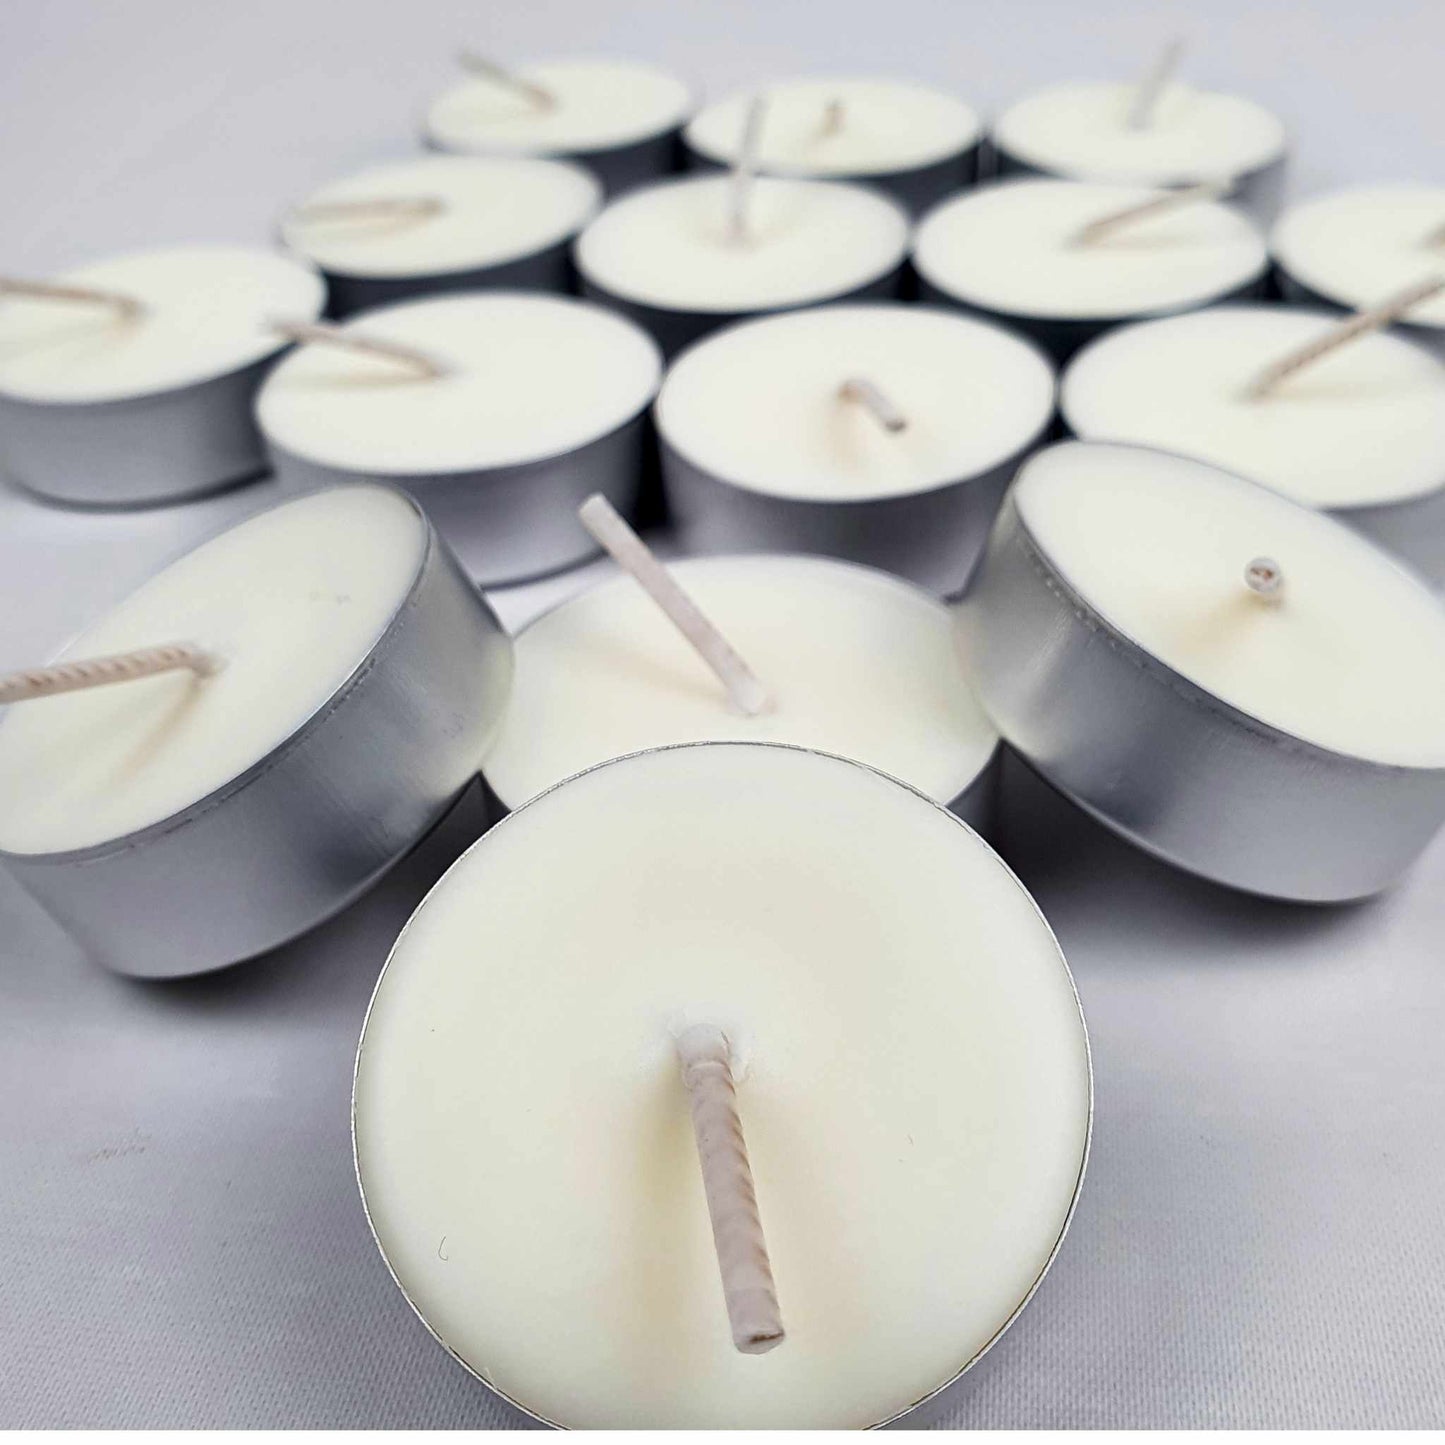 Sustainable soy wax tealights with refill options, offering a natural, toxin-free burn for eco-conscious homes.